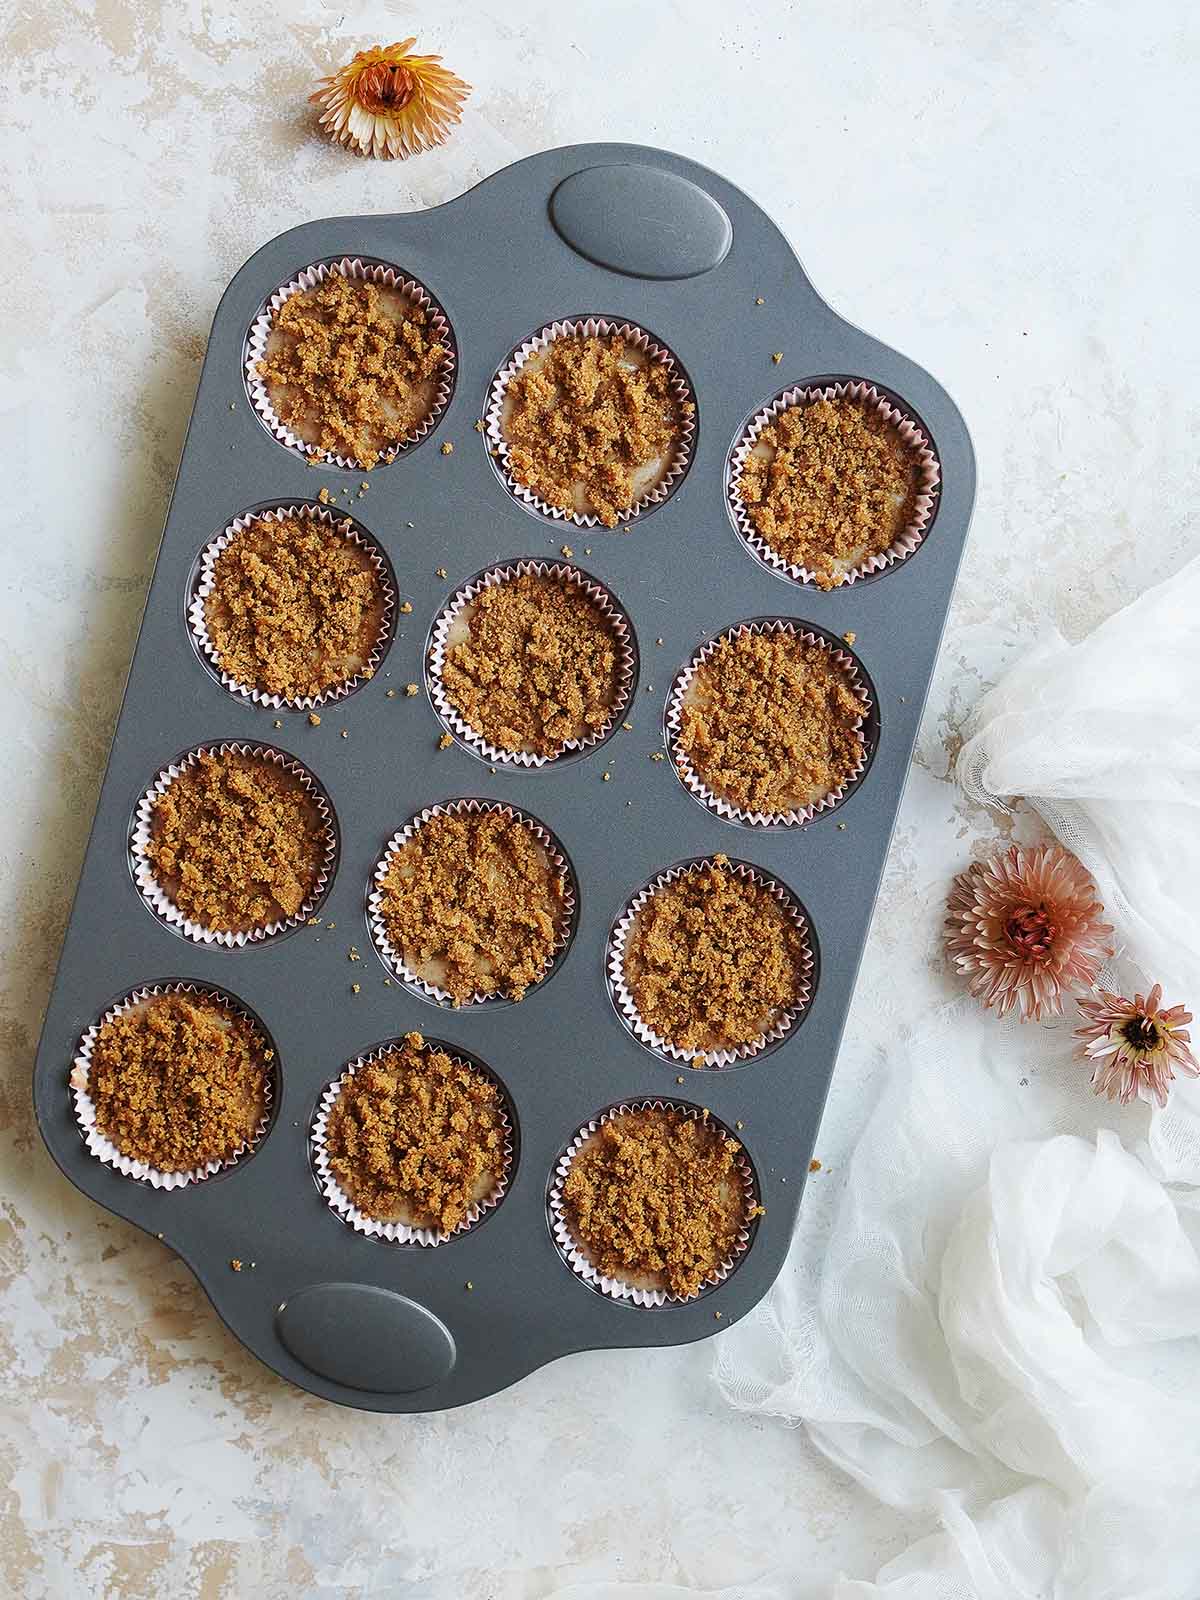 A 12 muffin pan showing the cinnamon crumbs on top of the batter.